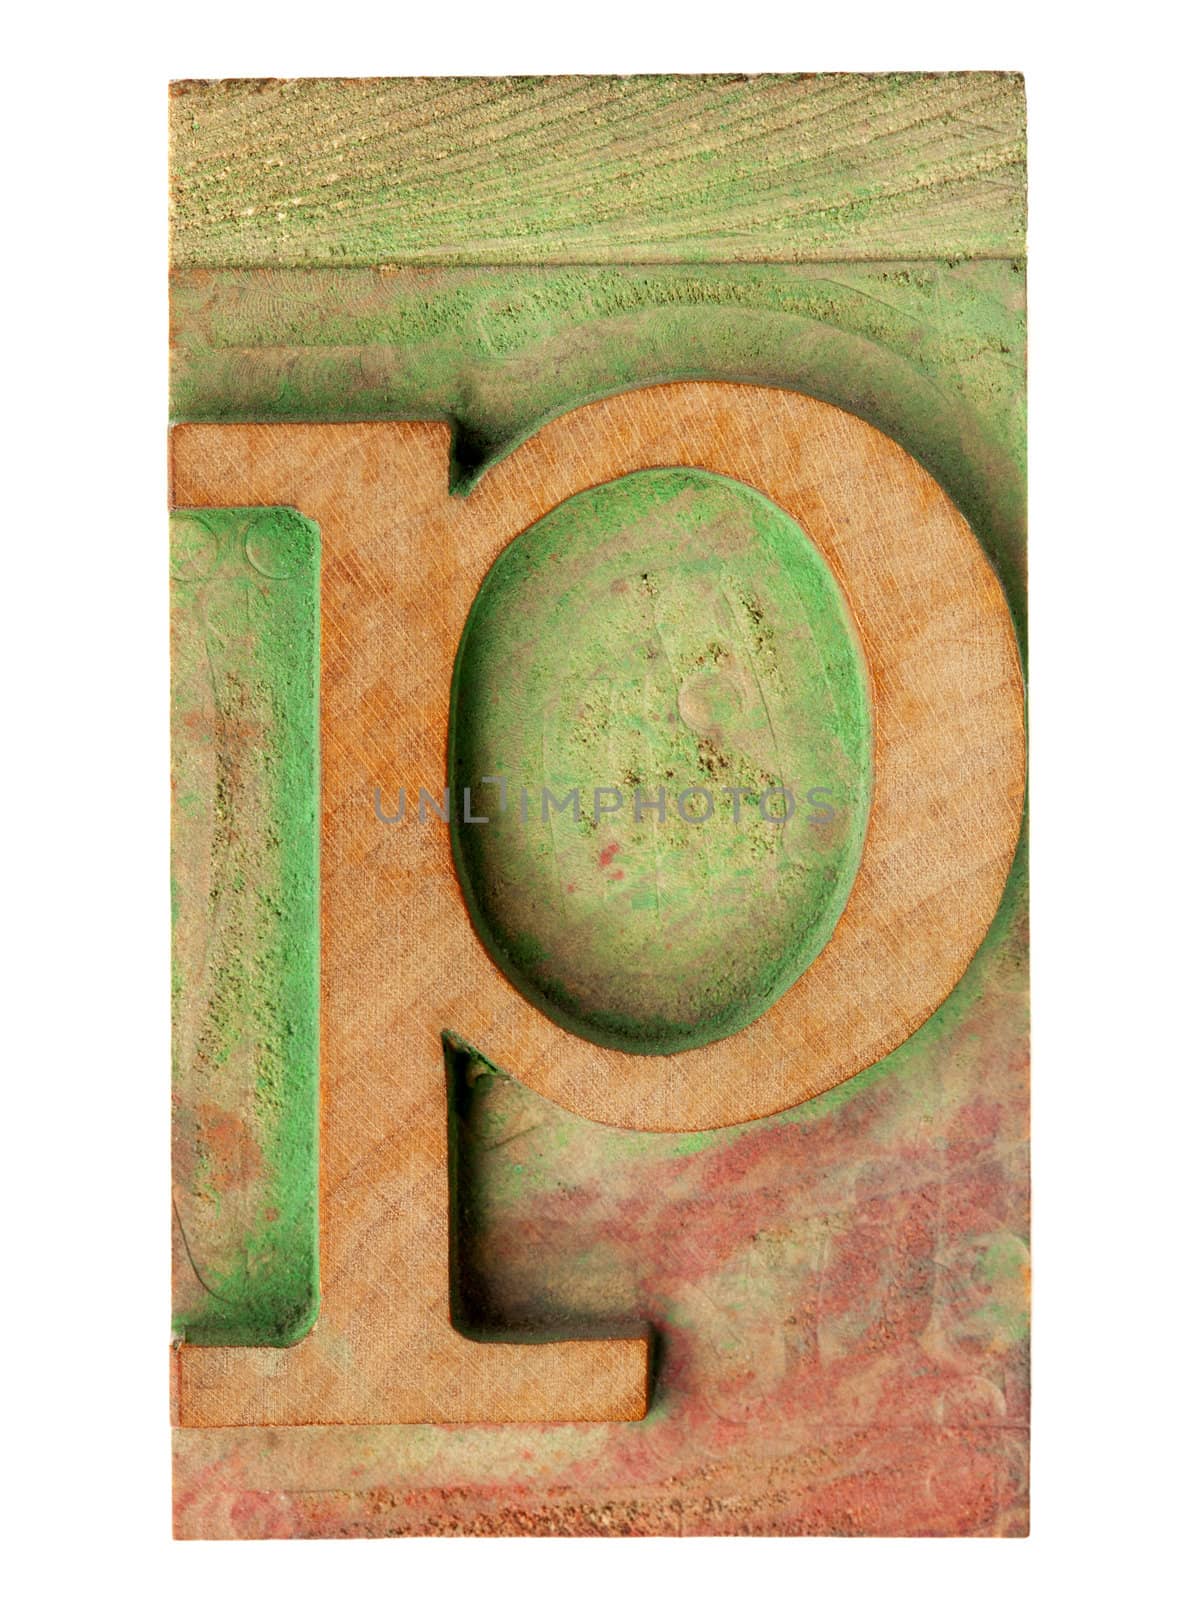 isolated letter p in vintage letterpress wood type stained by color ink